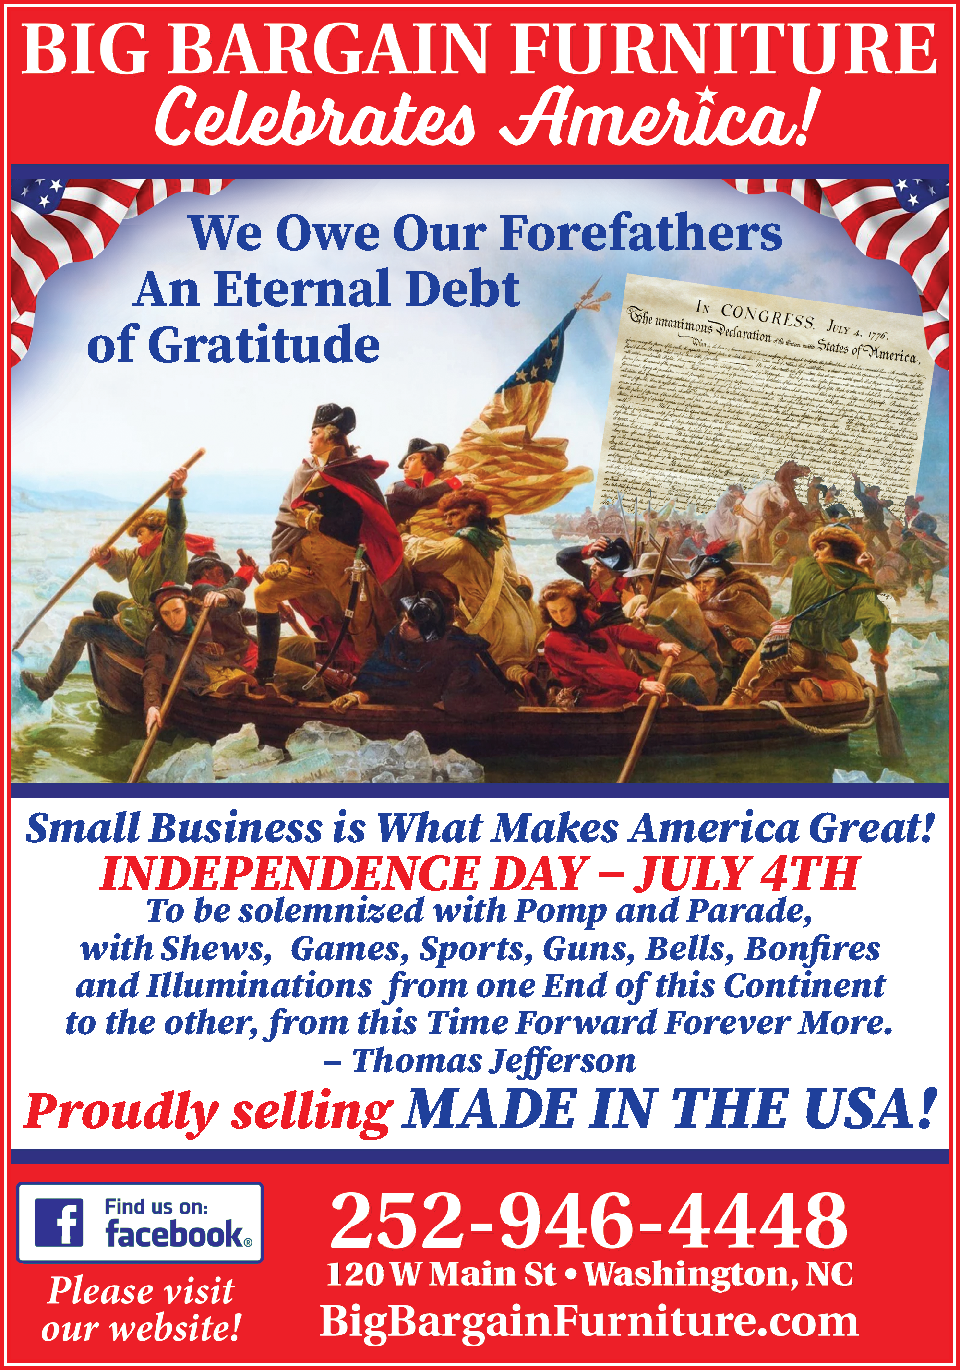 06-30-2022 Big Bargain July 4th Furniture Full Page Color